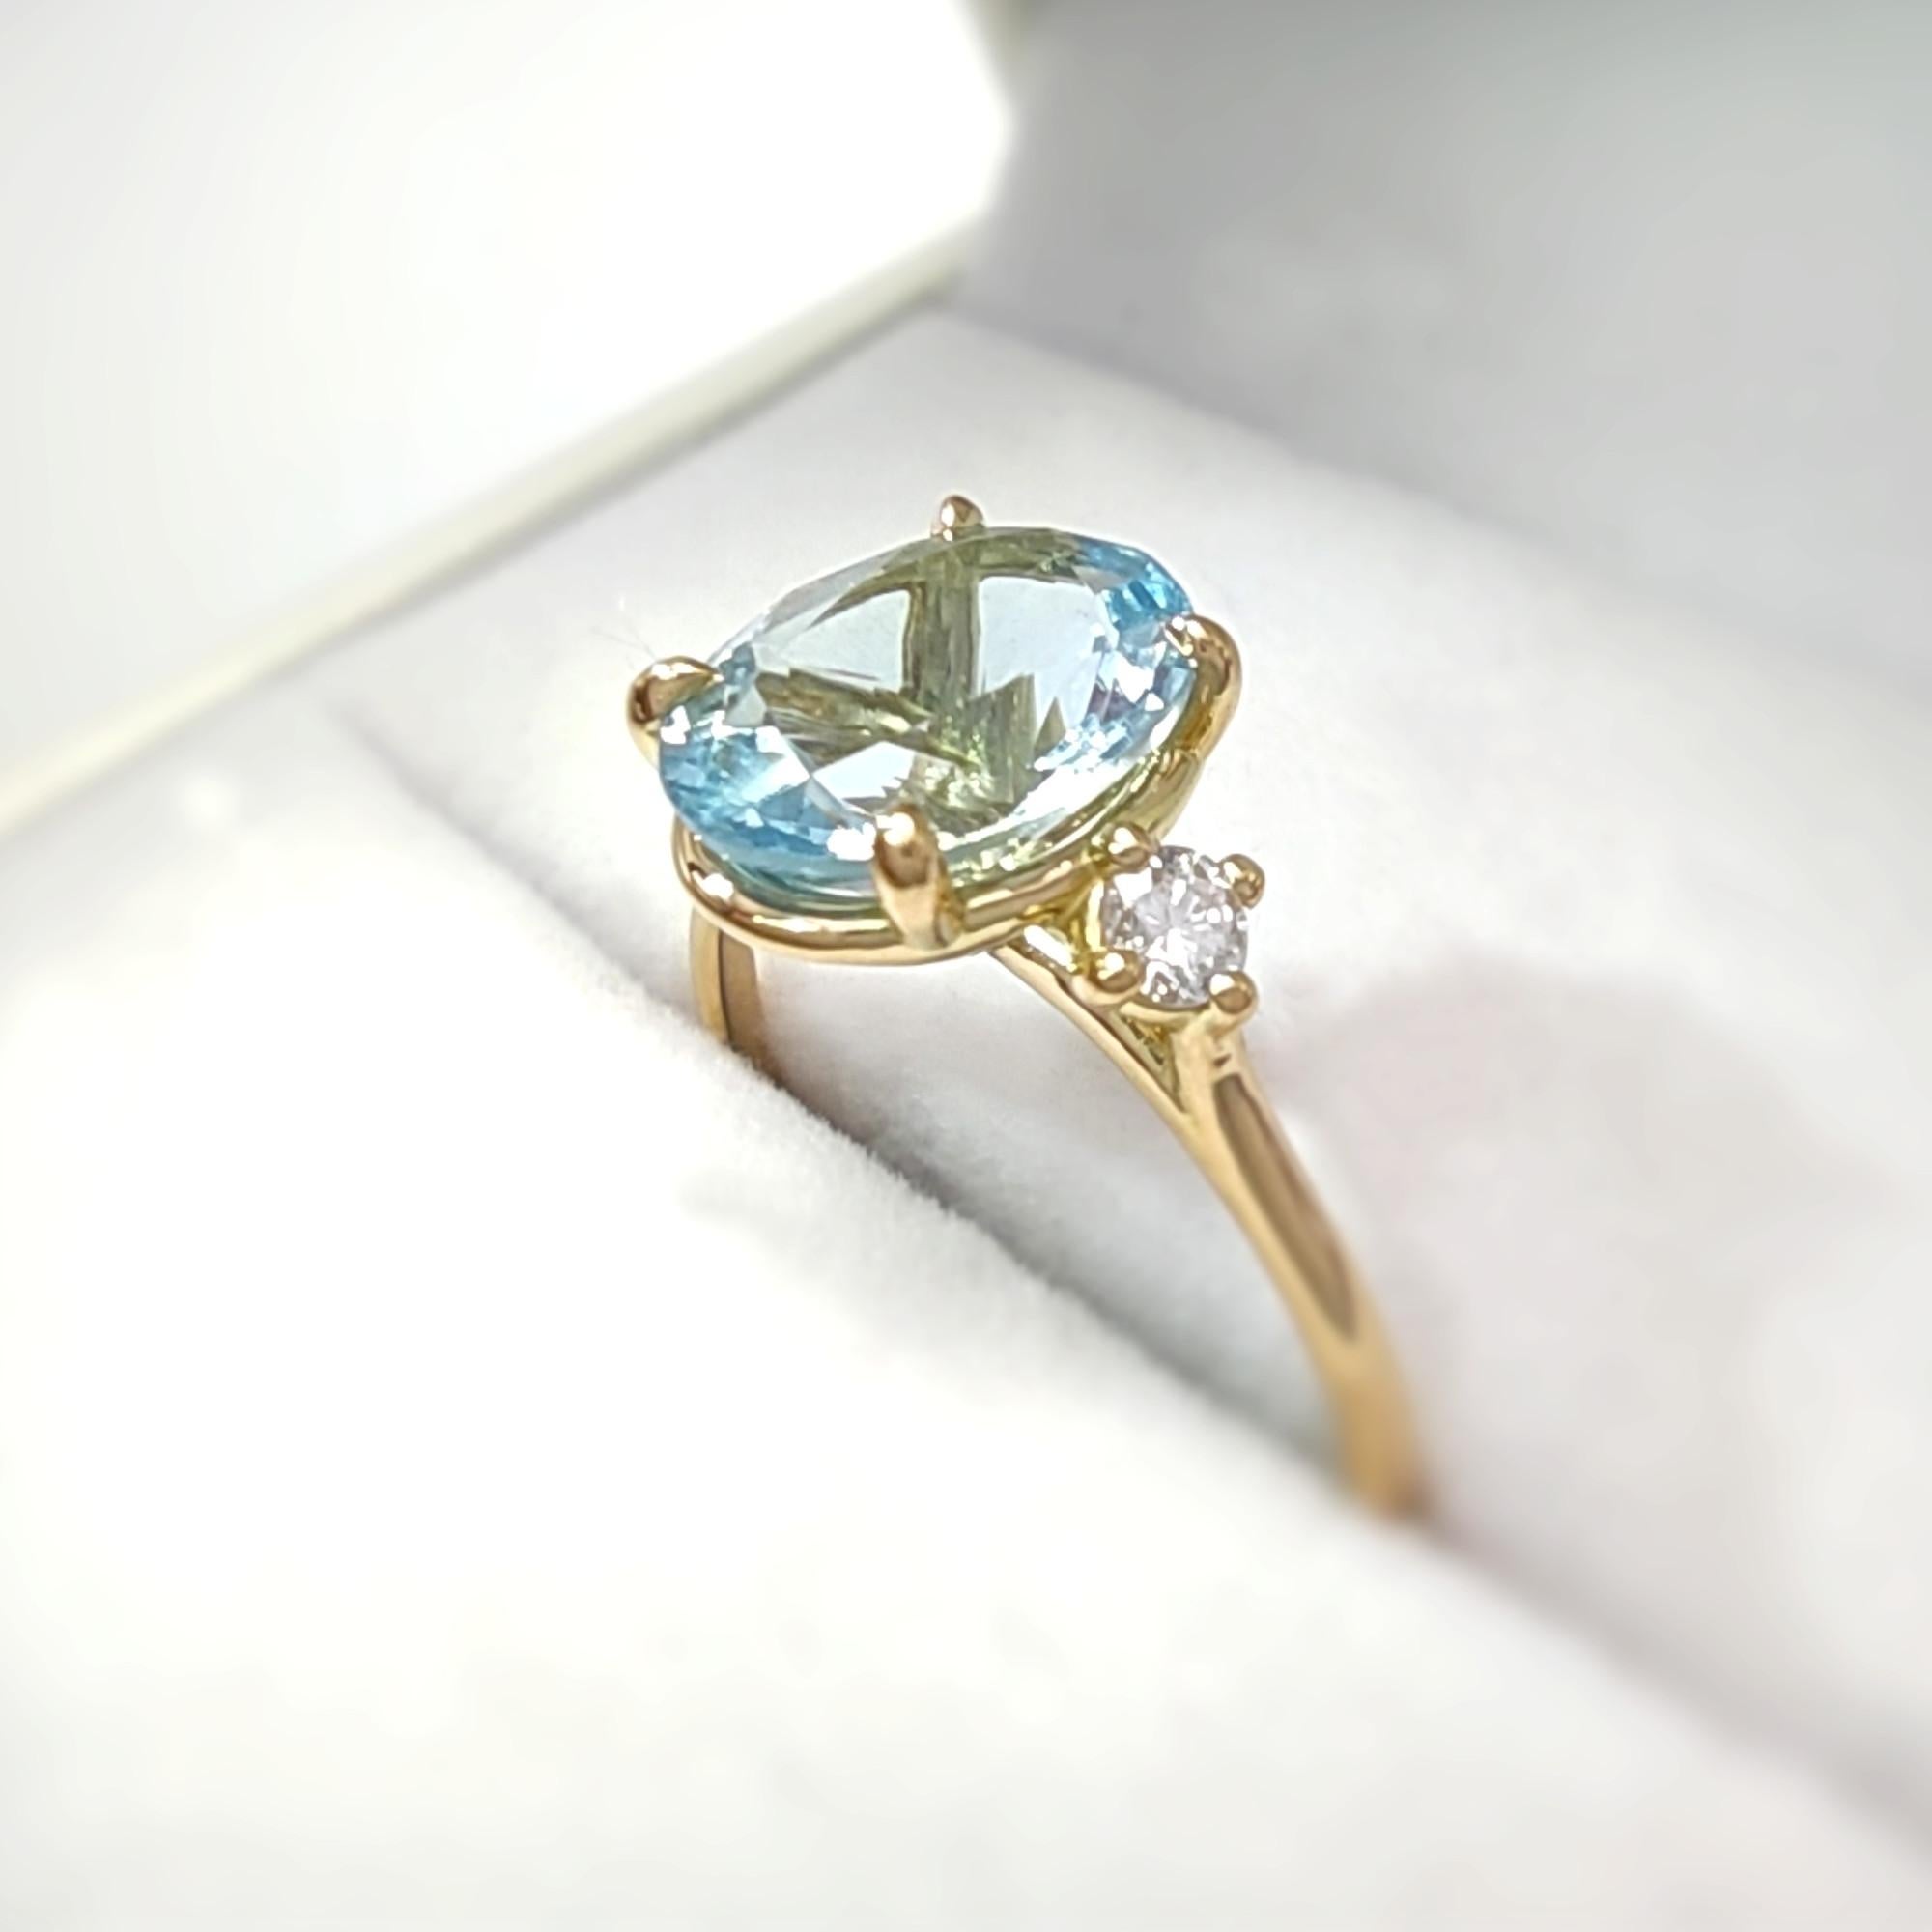 Crafted Perfection: Handmade 18K Gold Ring Featuring Exquisite Gemstones.

Elevate your style with our handcrafted 18K gold ring, boasting a classic yet timeless design adorned with an oval aquamarine centerpiece and dazzling diamonds. Discover